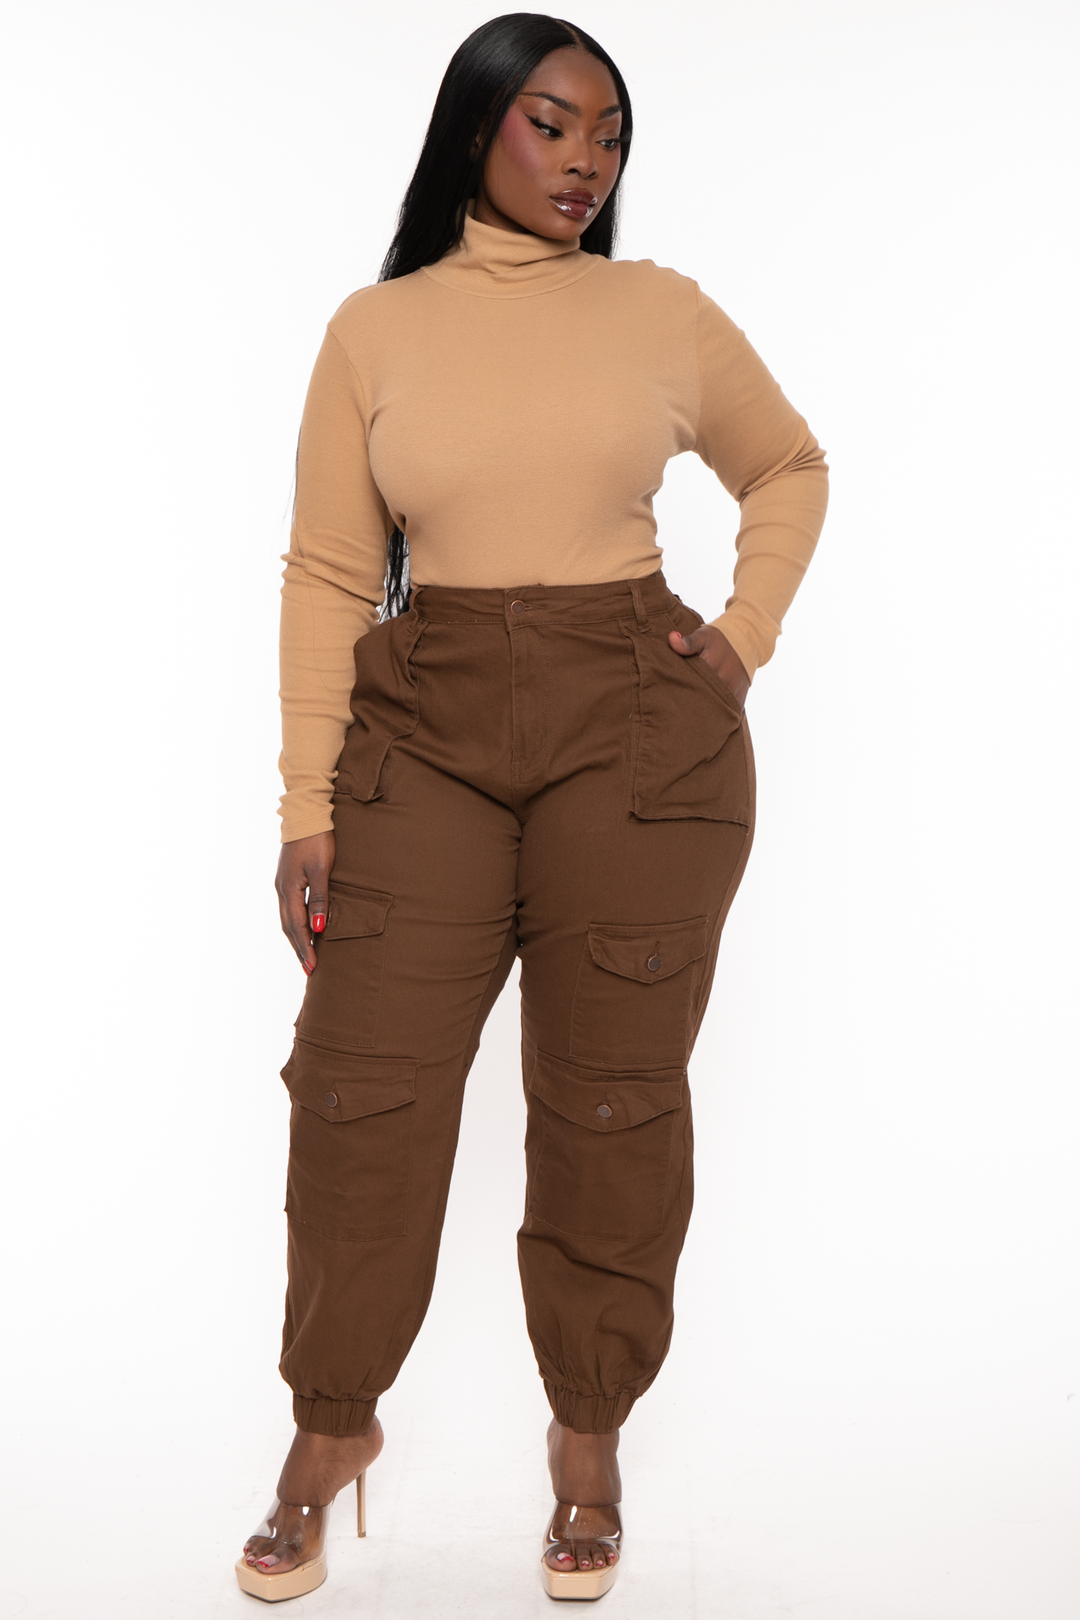 Plus Size Brown Joggers For Women